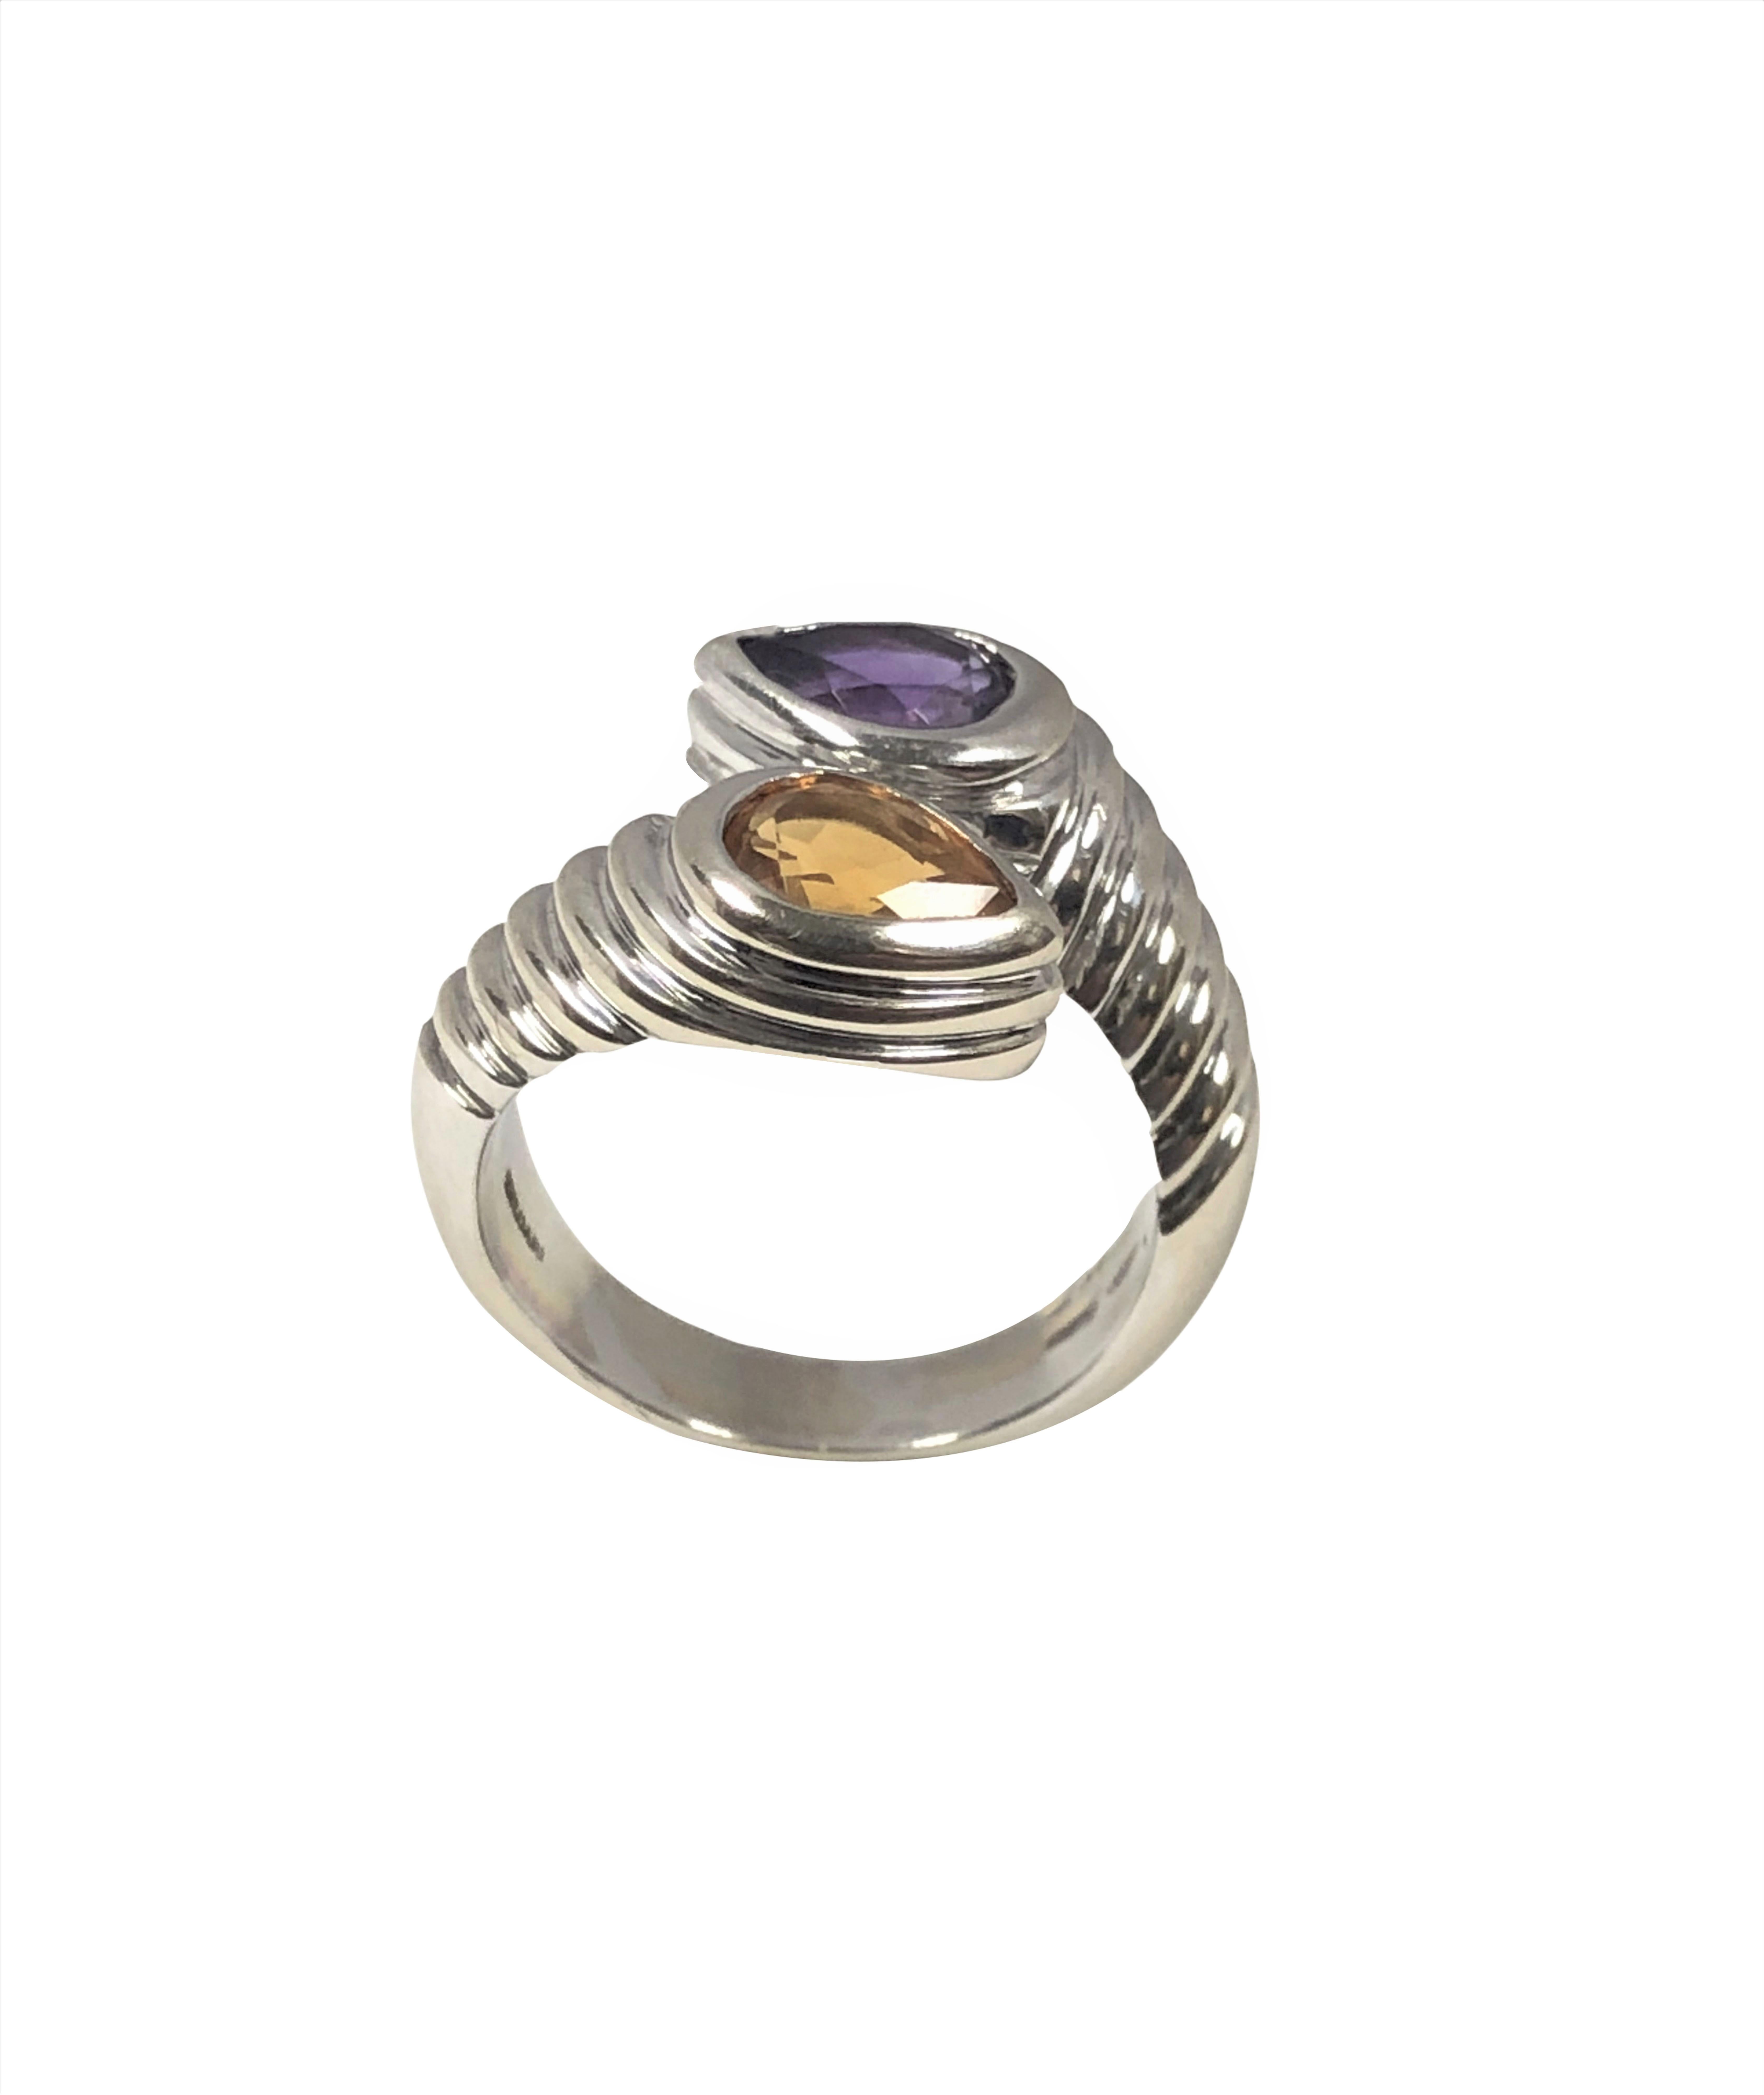 Circa 2016 Bulgari 18k White Gold Bypass Ring, measuring 5/8 inch across the top, having a ribbed design and set with a Pear shape Amethyst and a Pear shape Citrine each being approximately 1 Carat each. Finger size 6. Comes in original Bulgari